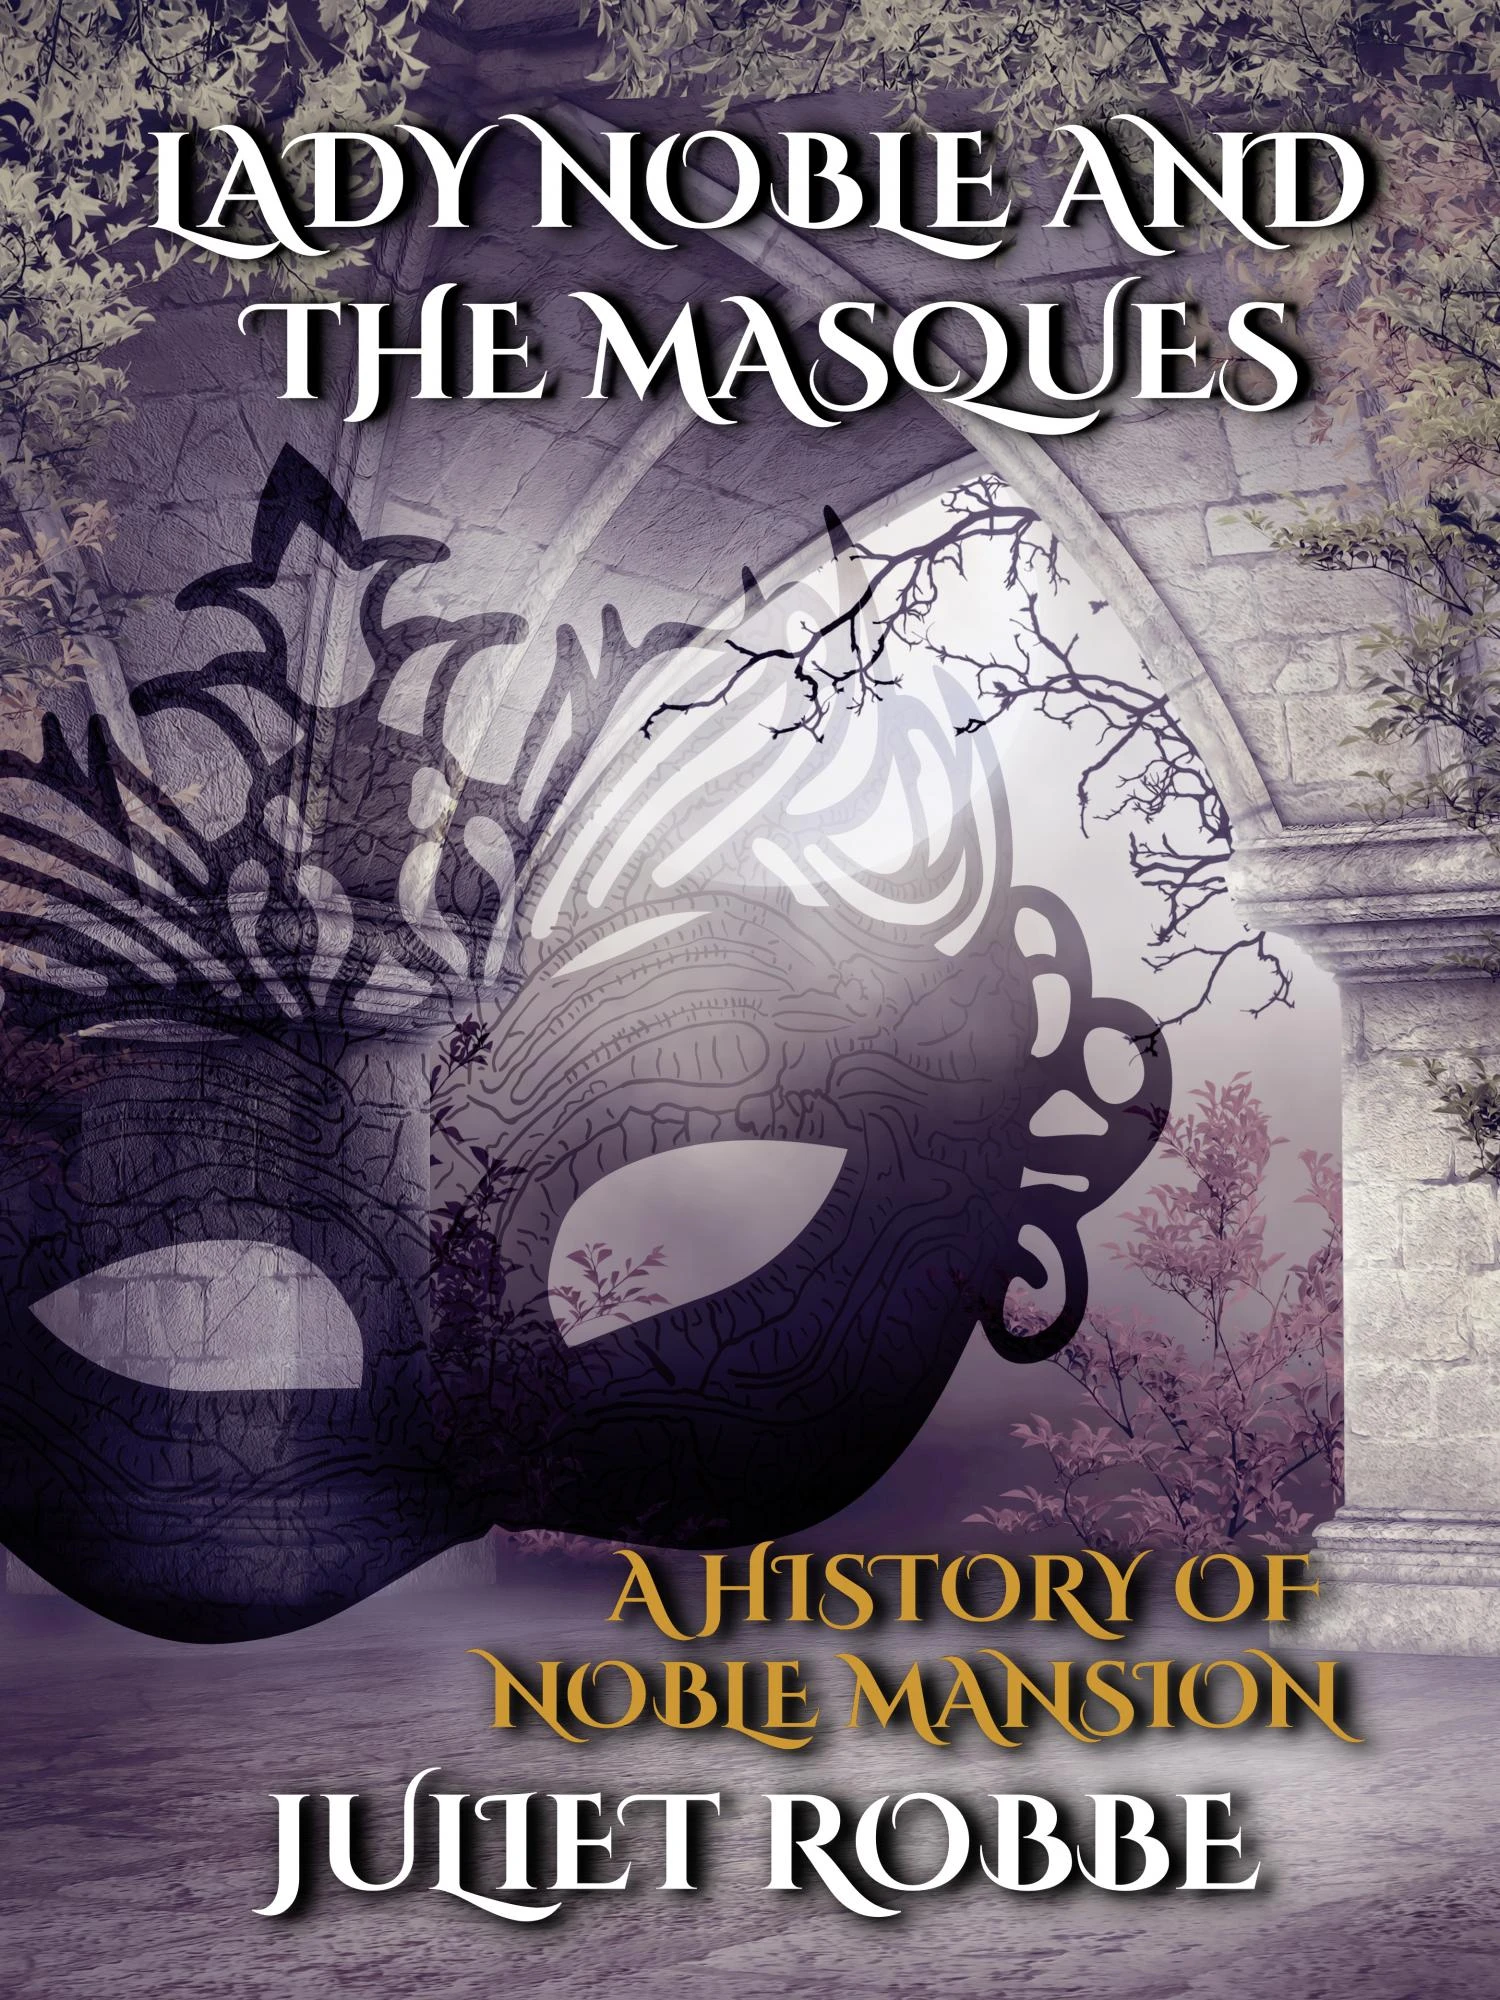 Lady Noble and the Masques